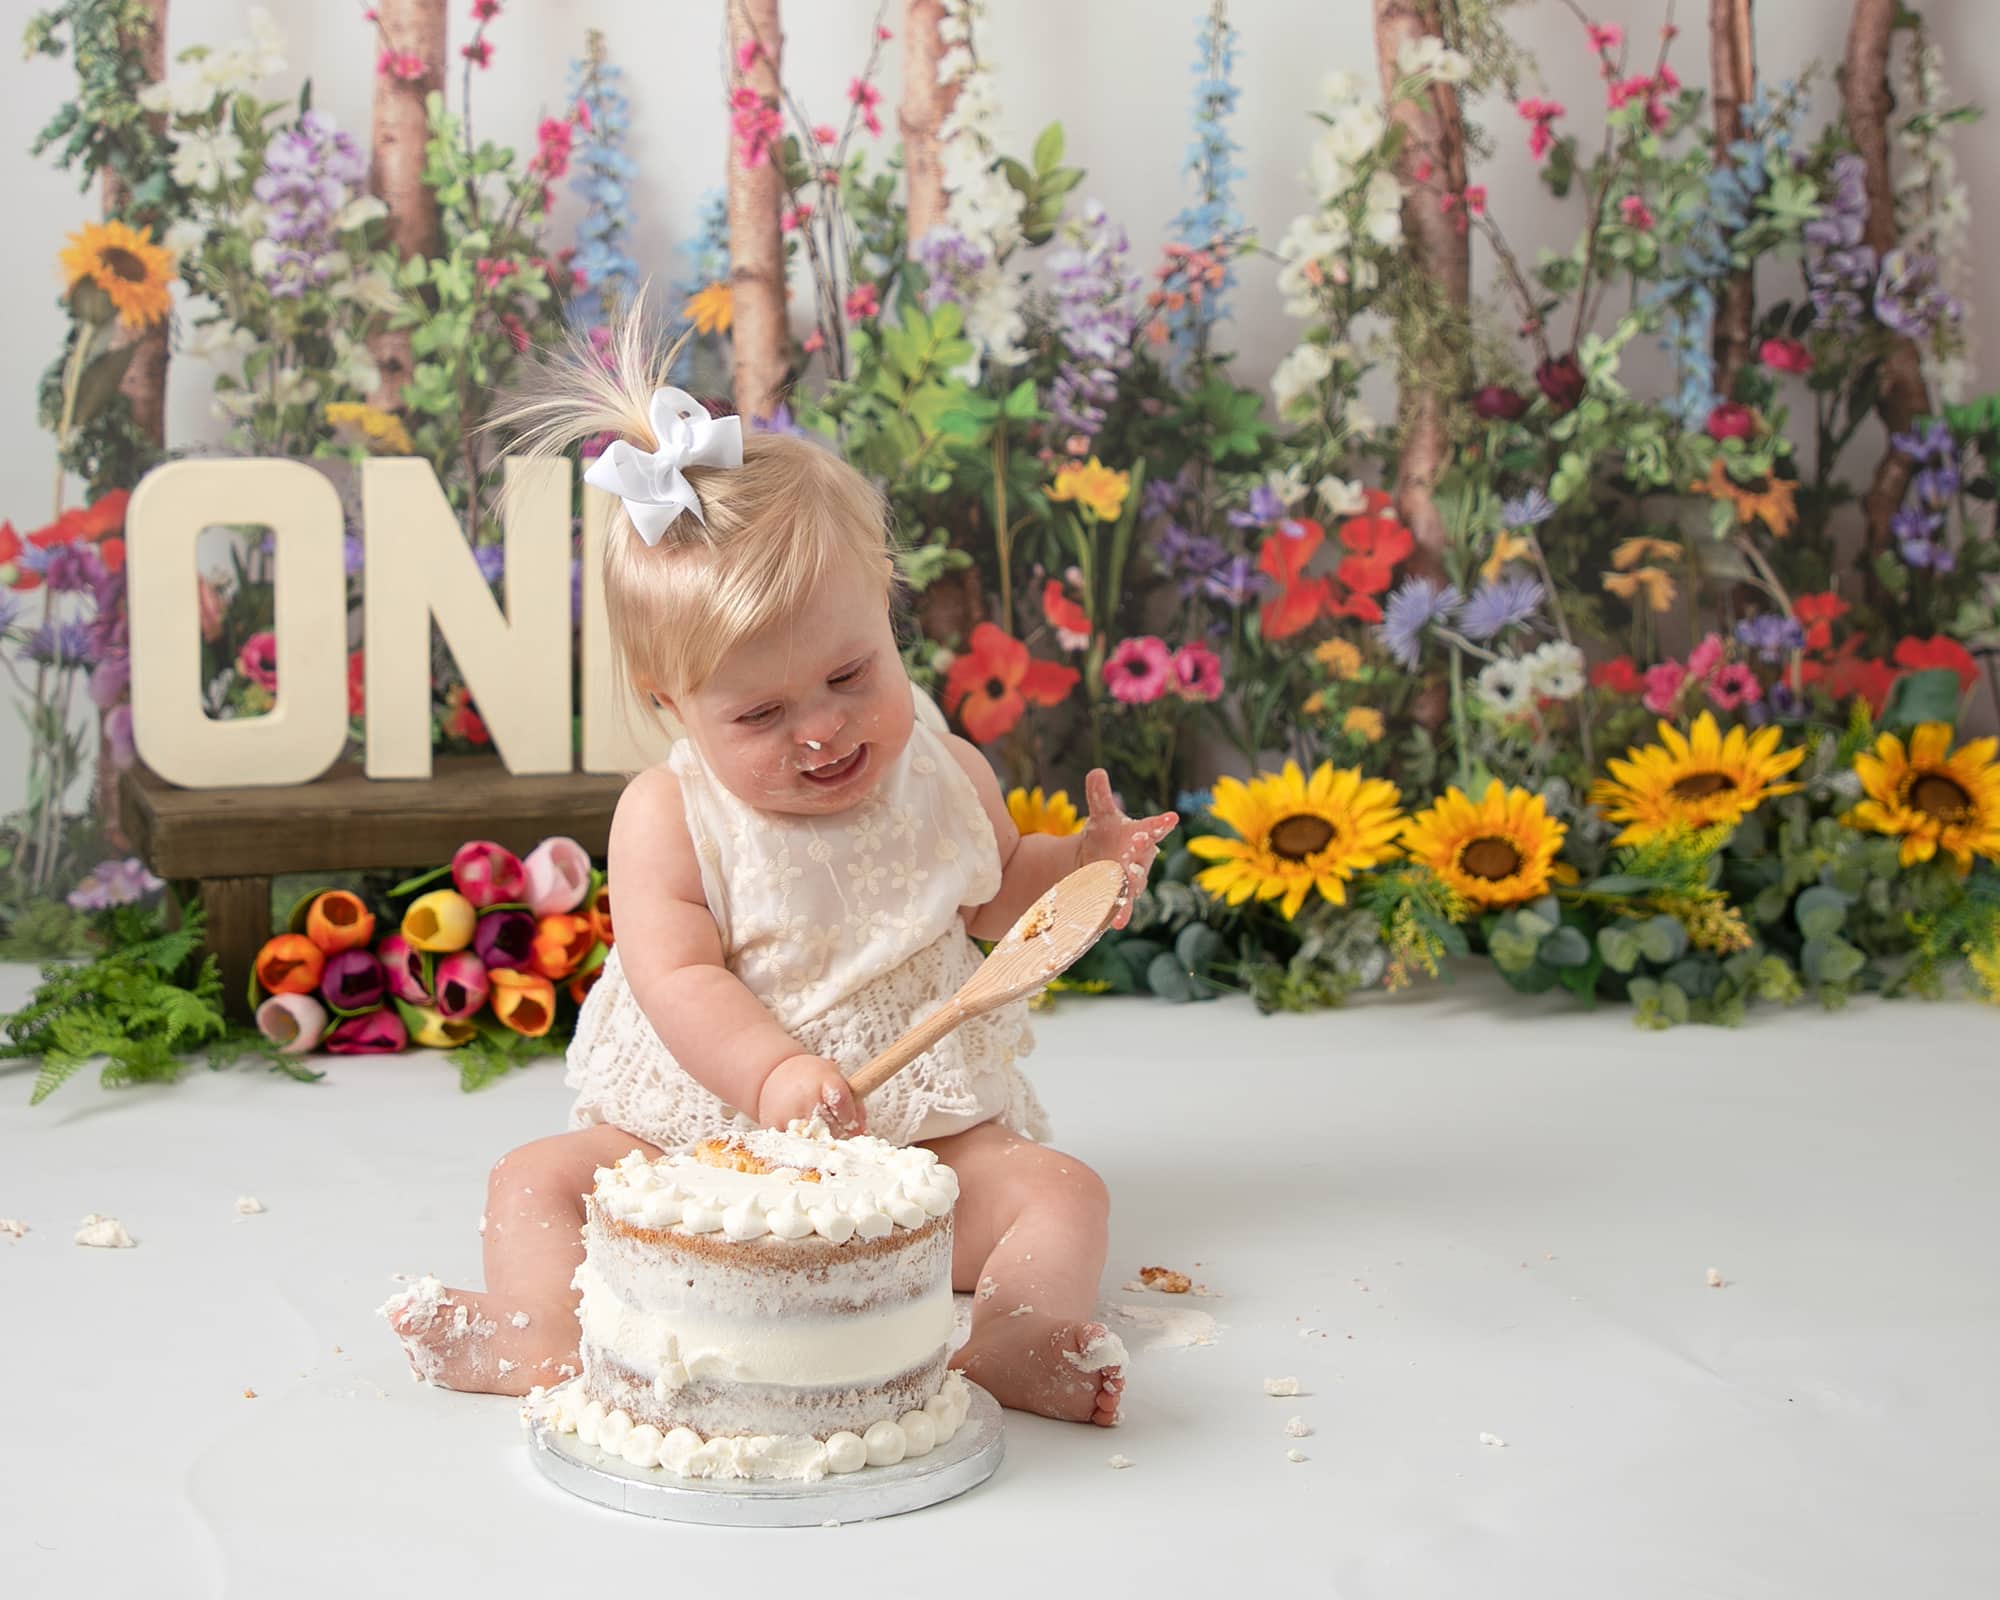 Baby girl sat behind a cake playing with a wooden spoon. using a meadow style backdrop with lots of flowers